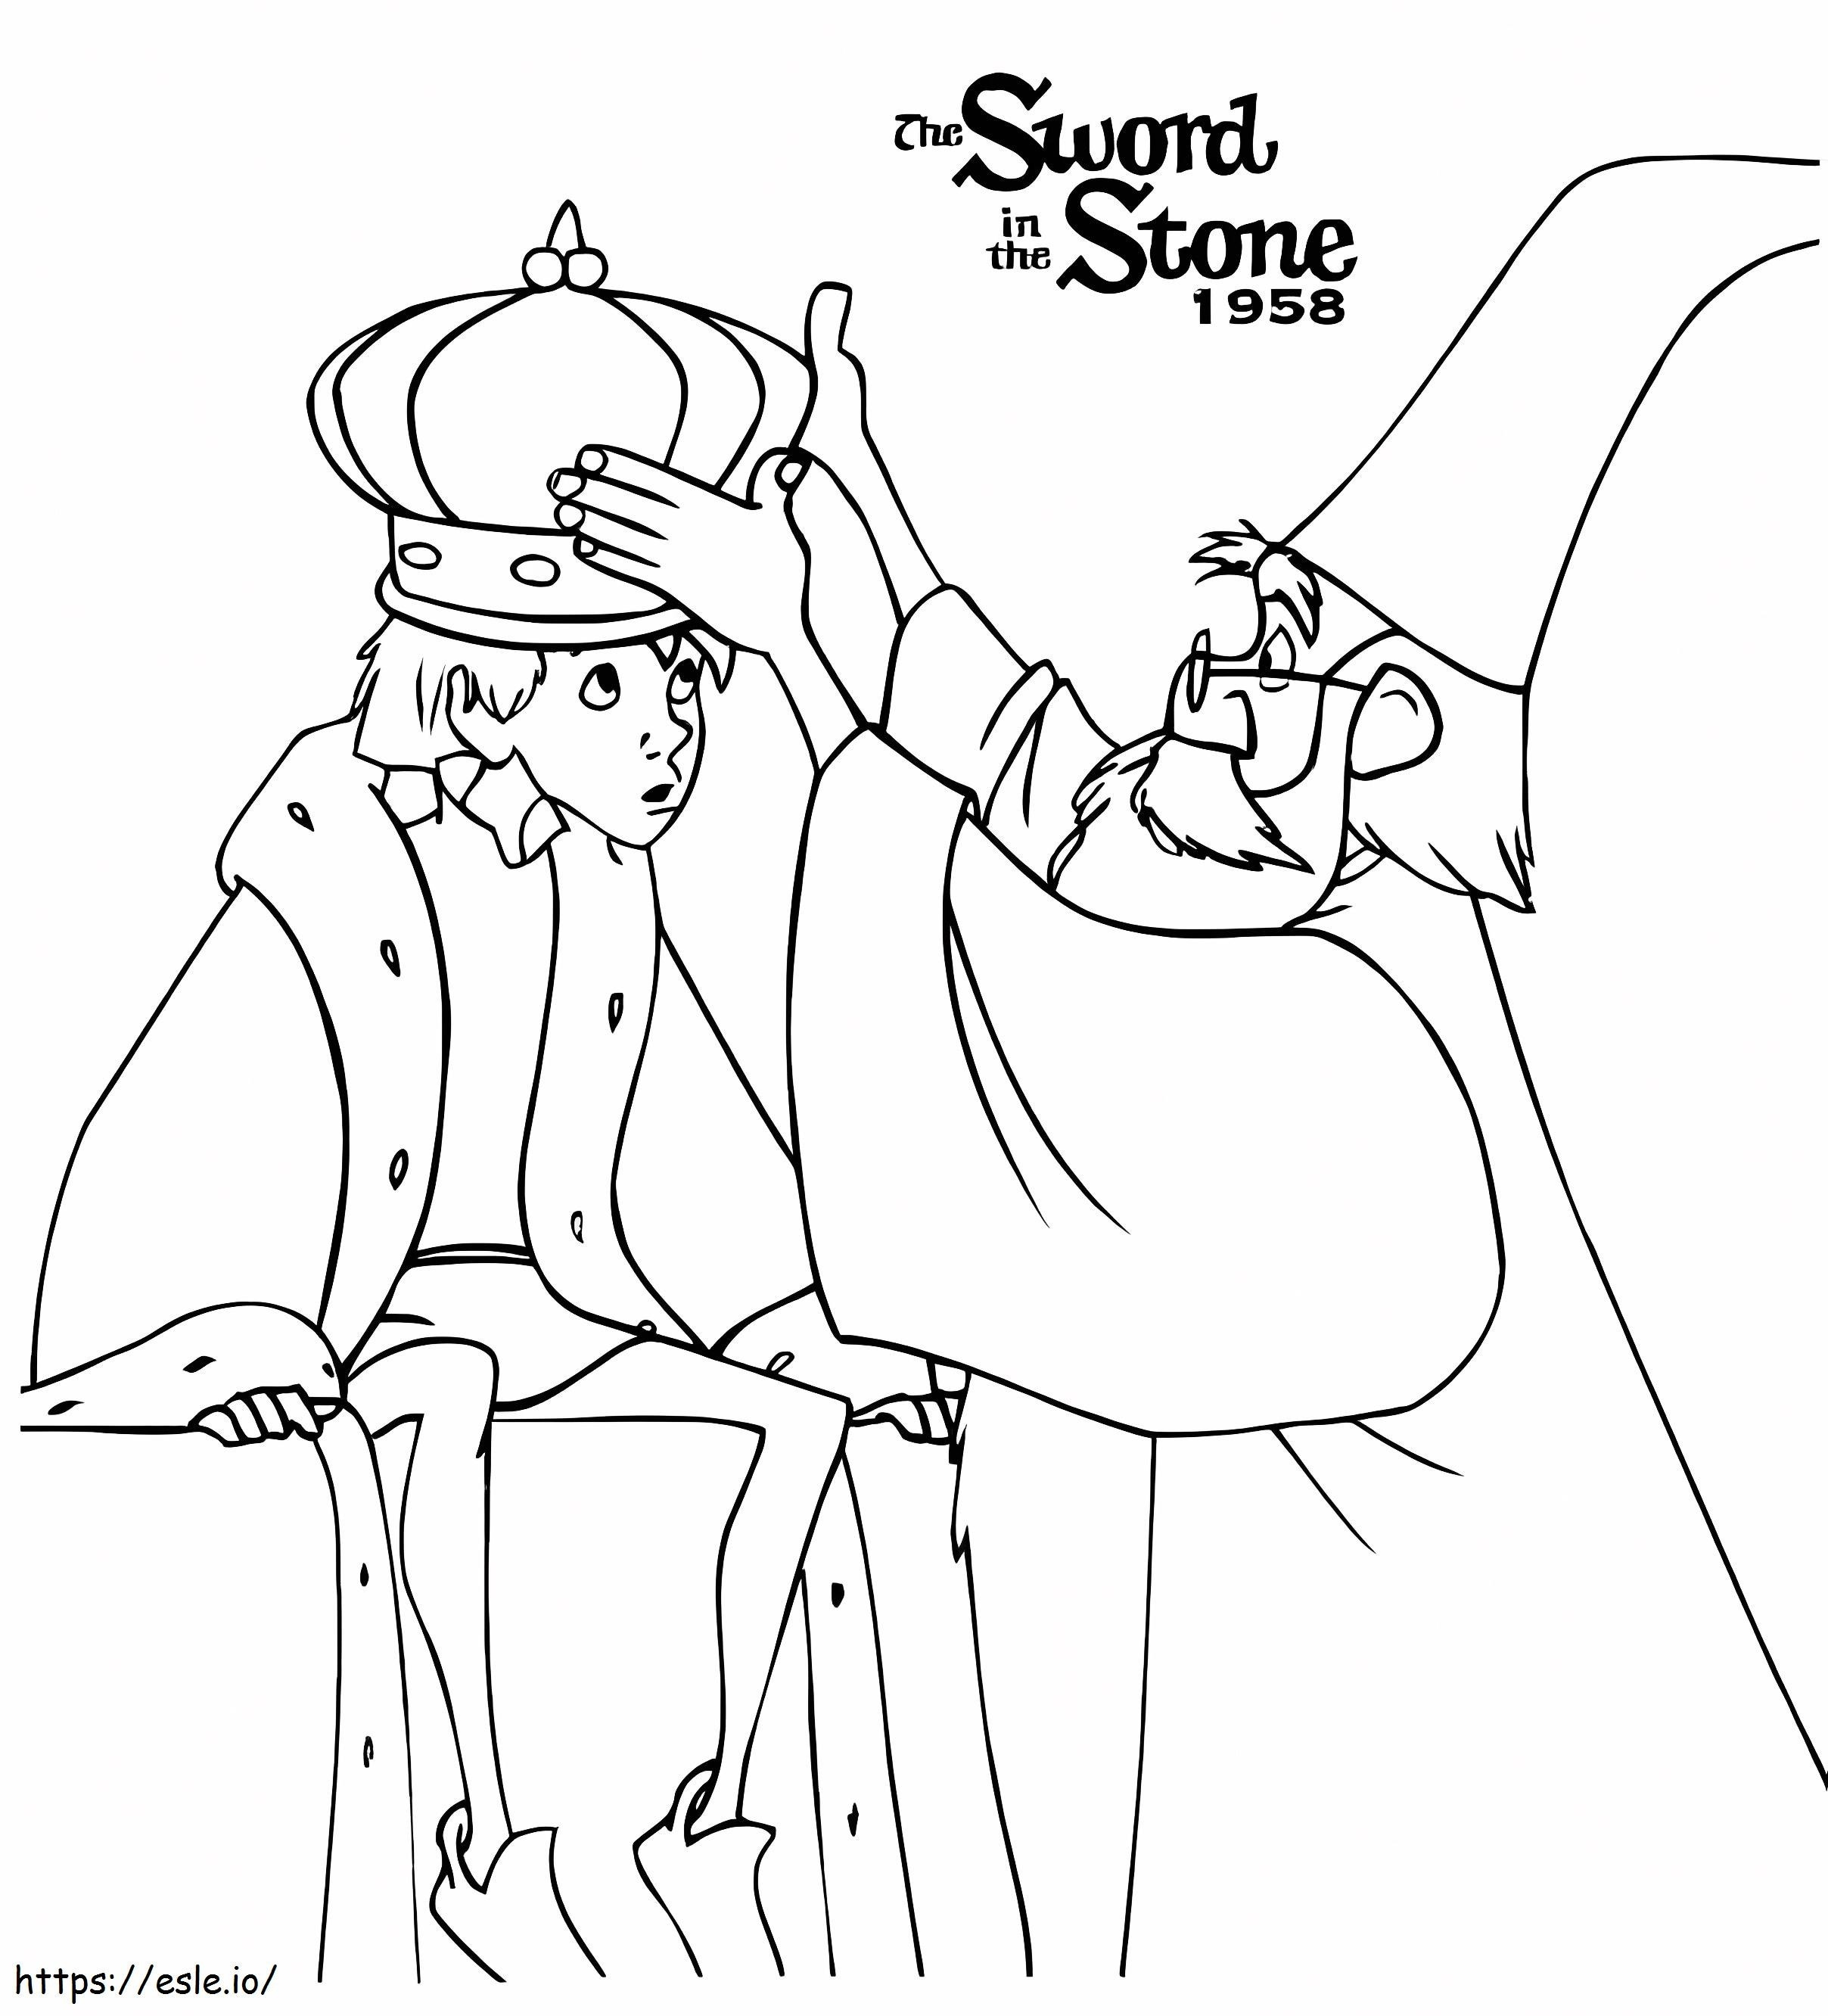 Merlin And Arthur coloring page